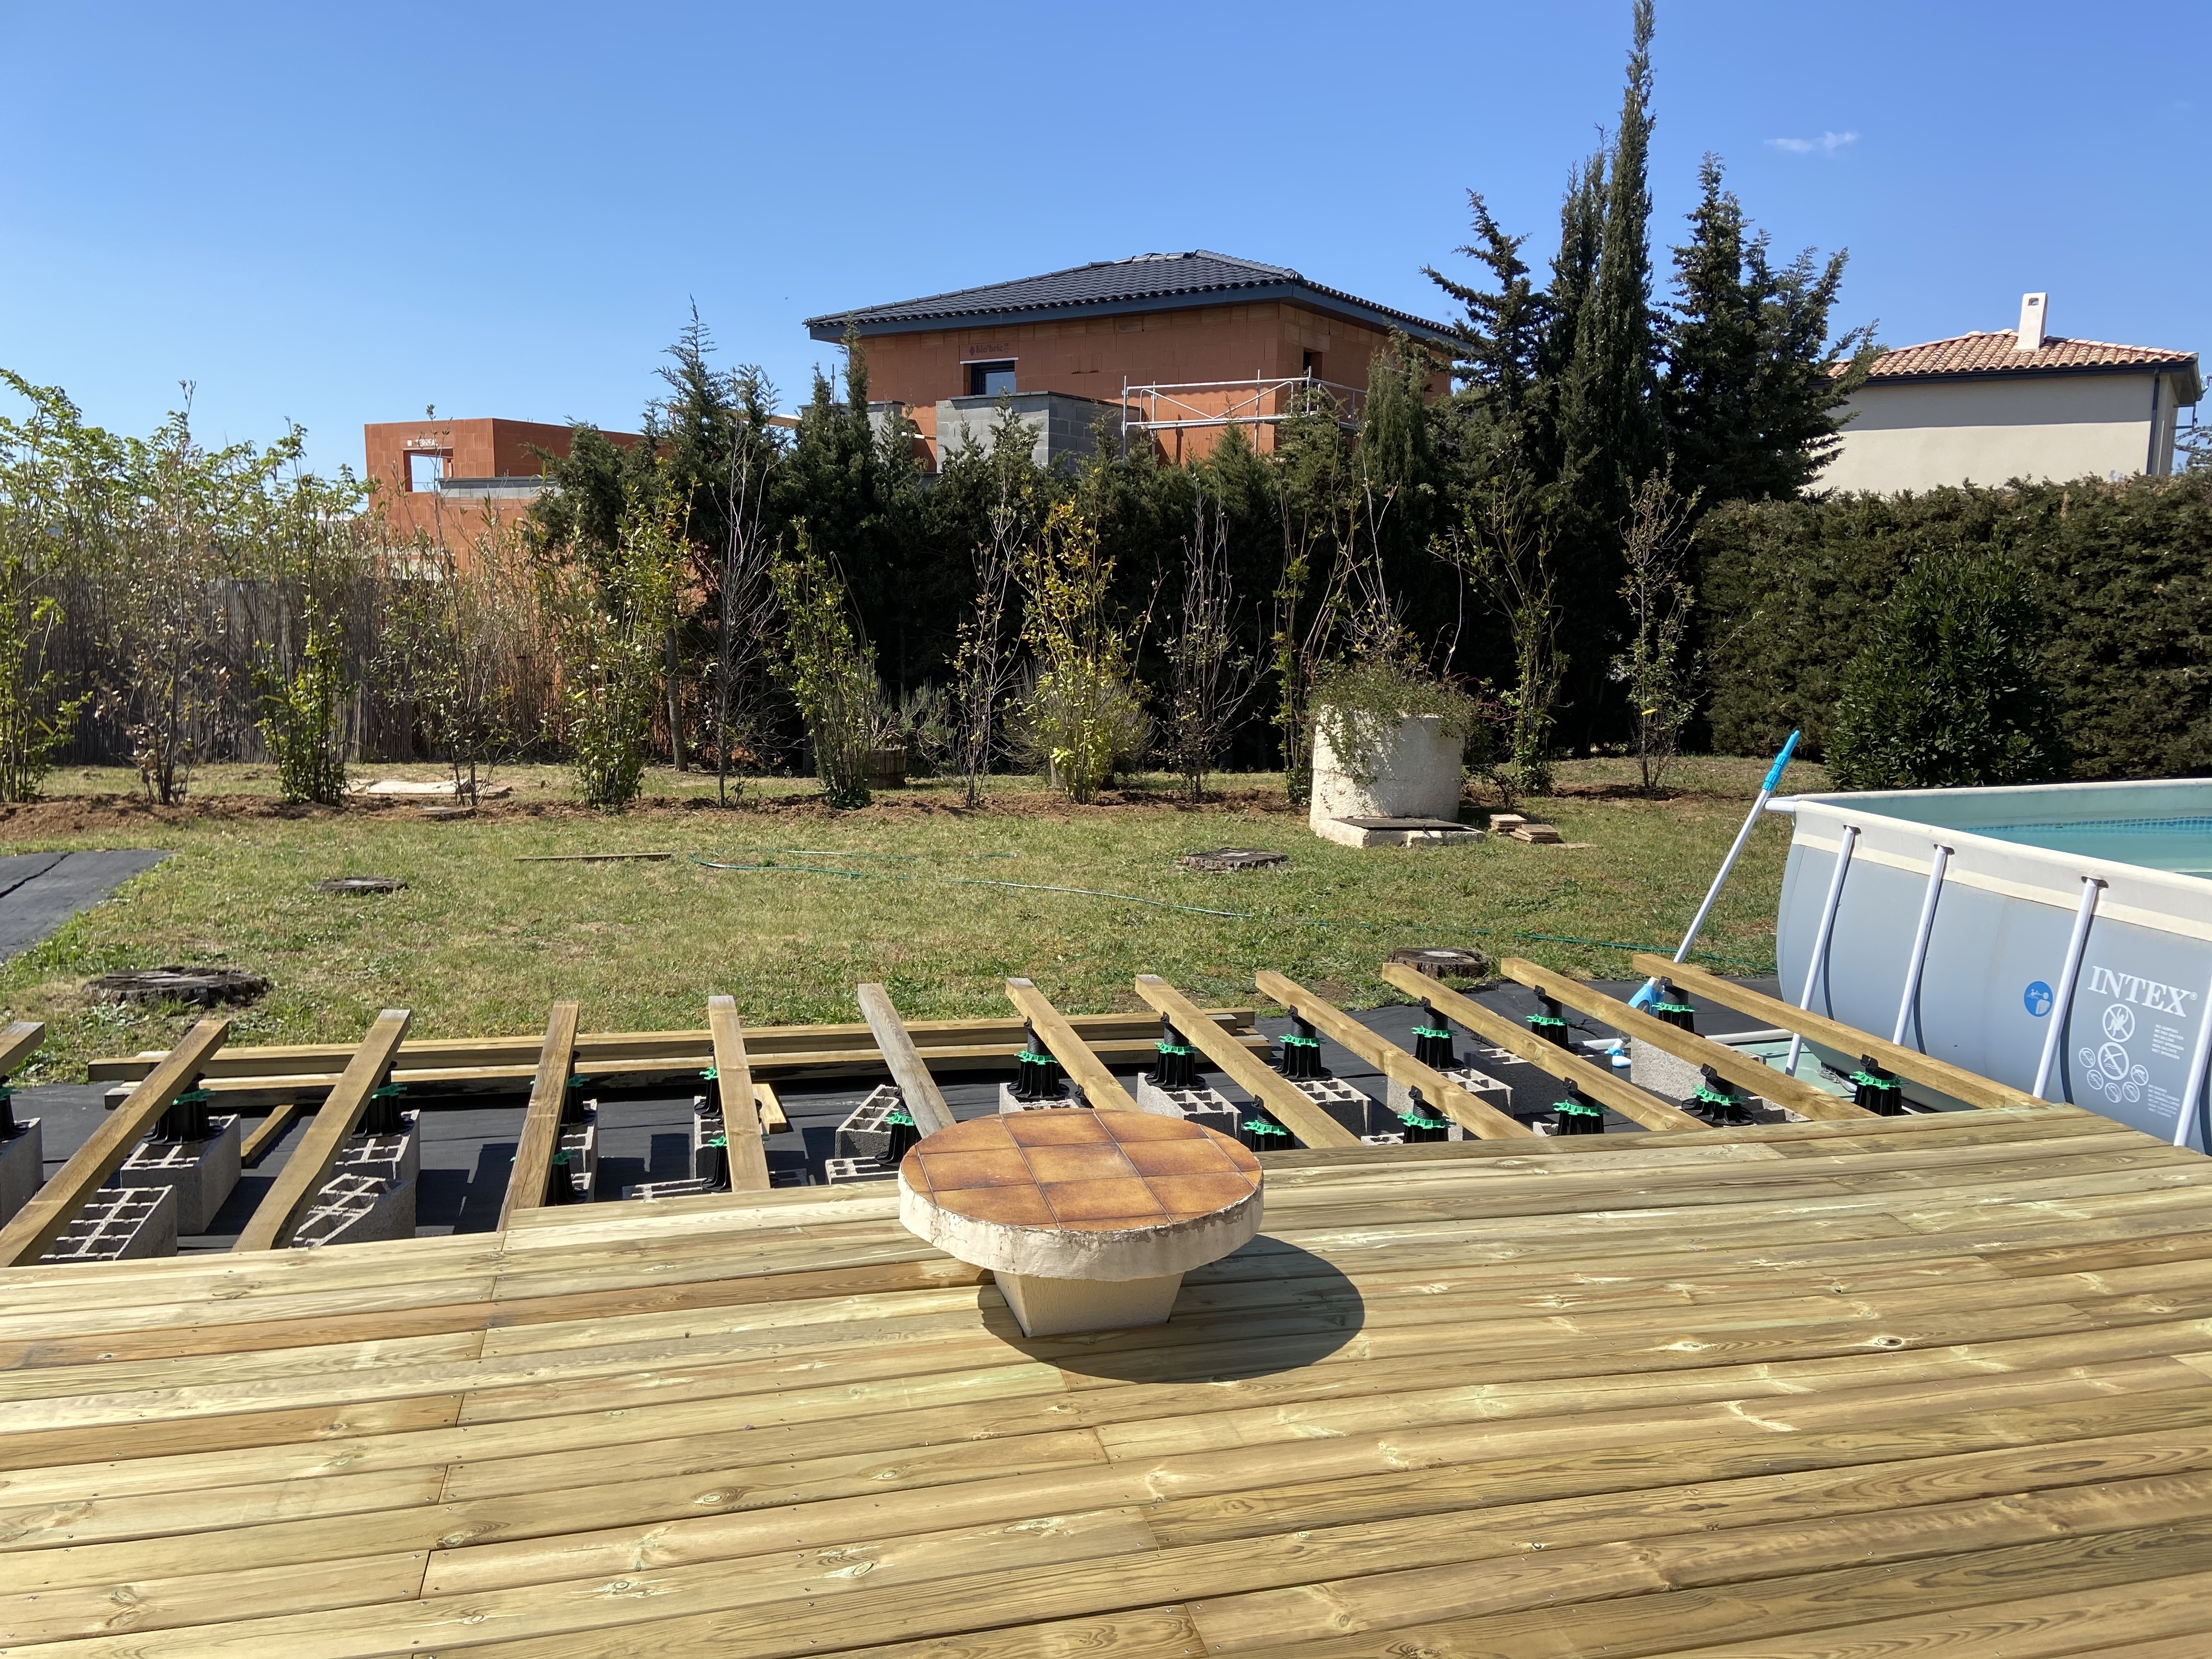 Building the second 10m by 4m decking section is almost complete. The fairy circle table becomes a feature. We replaced the old inflatable pool which a local cat punctured with a larger one. We planted 14 trees to hide the hideous new builds behind us.